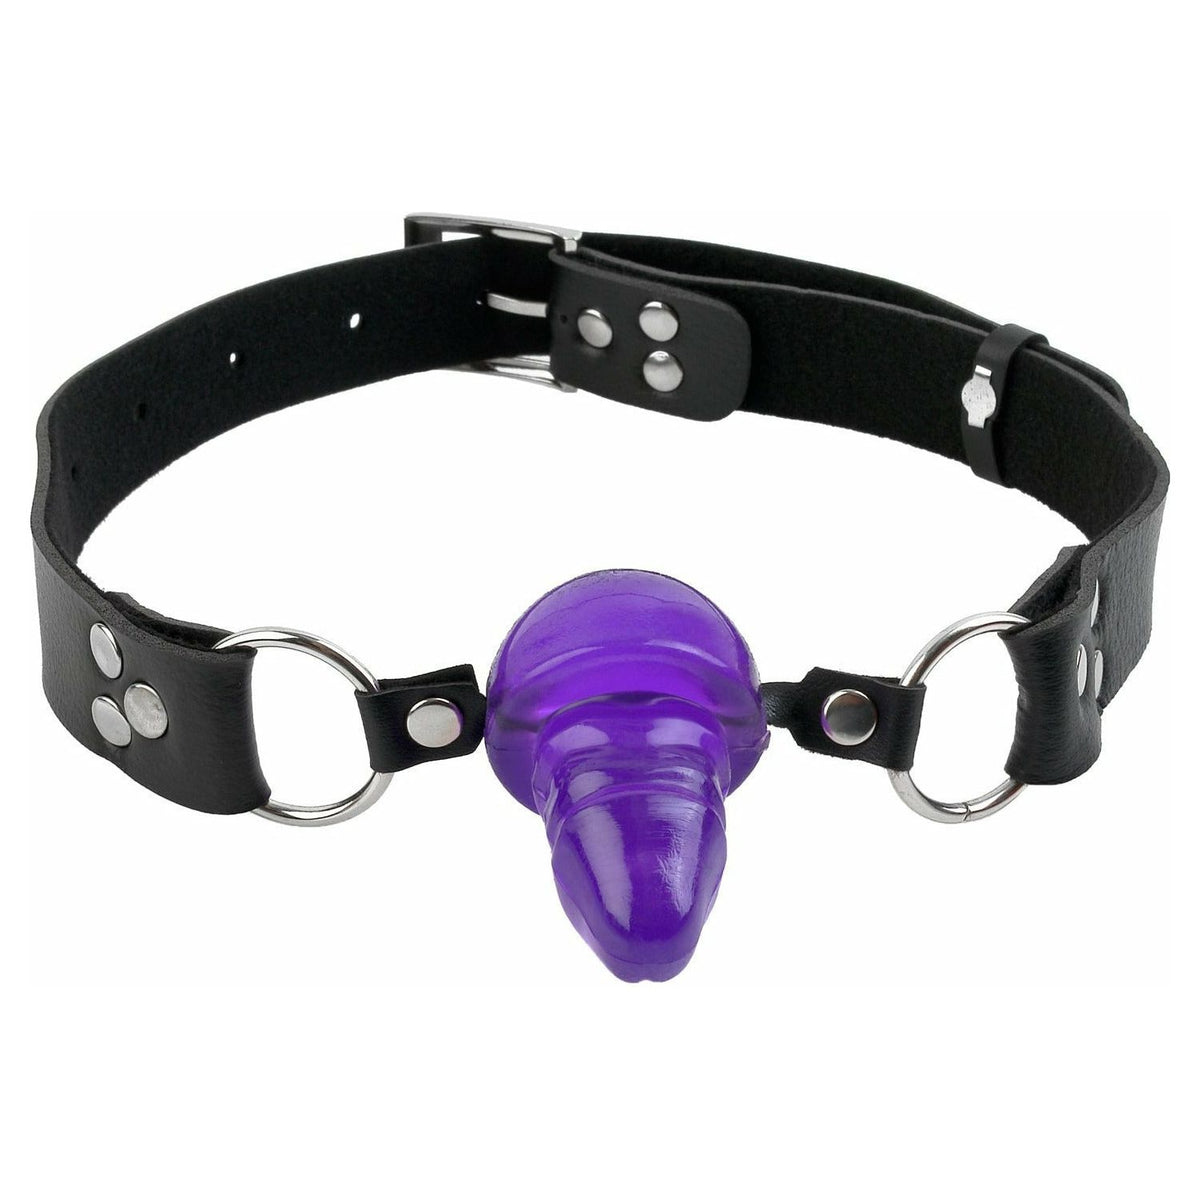 Pipedream Products Fetish Fantasy Penis Ball Gag